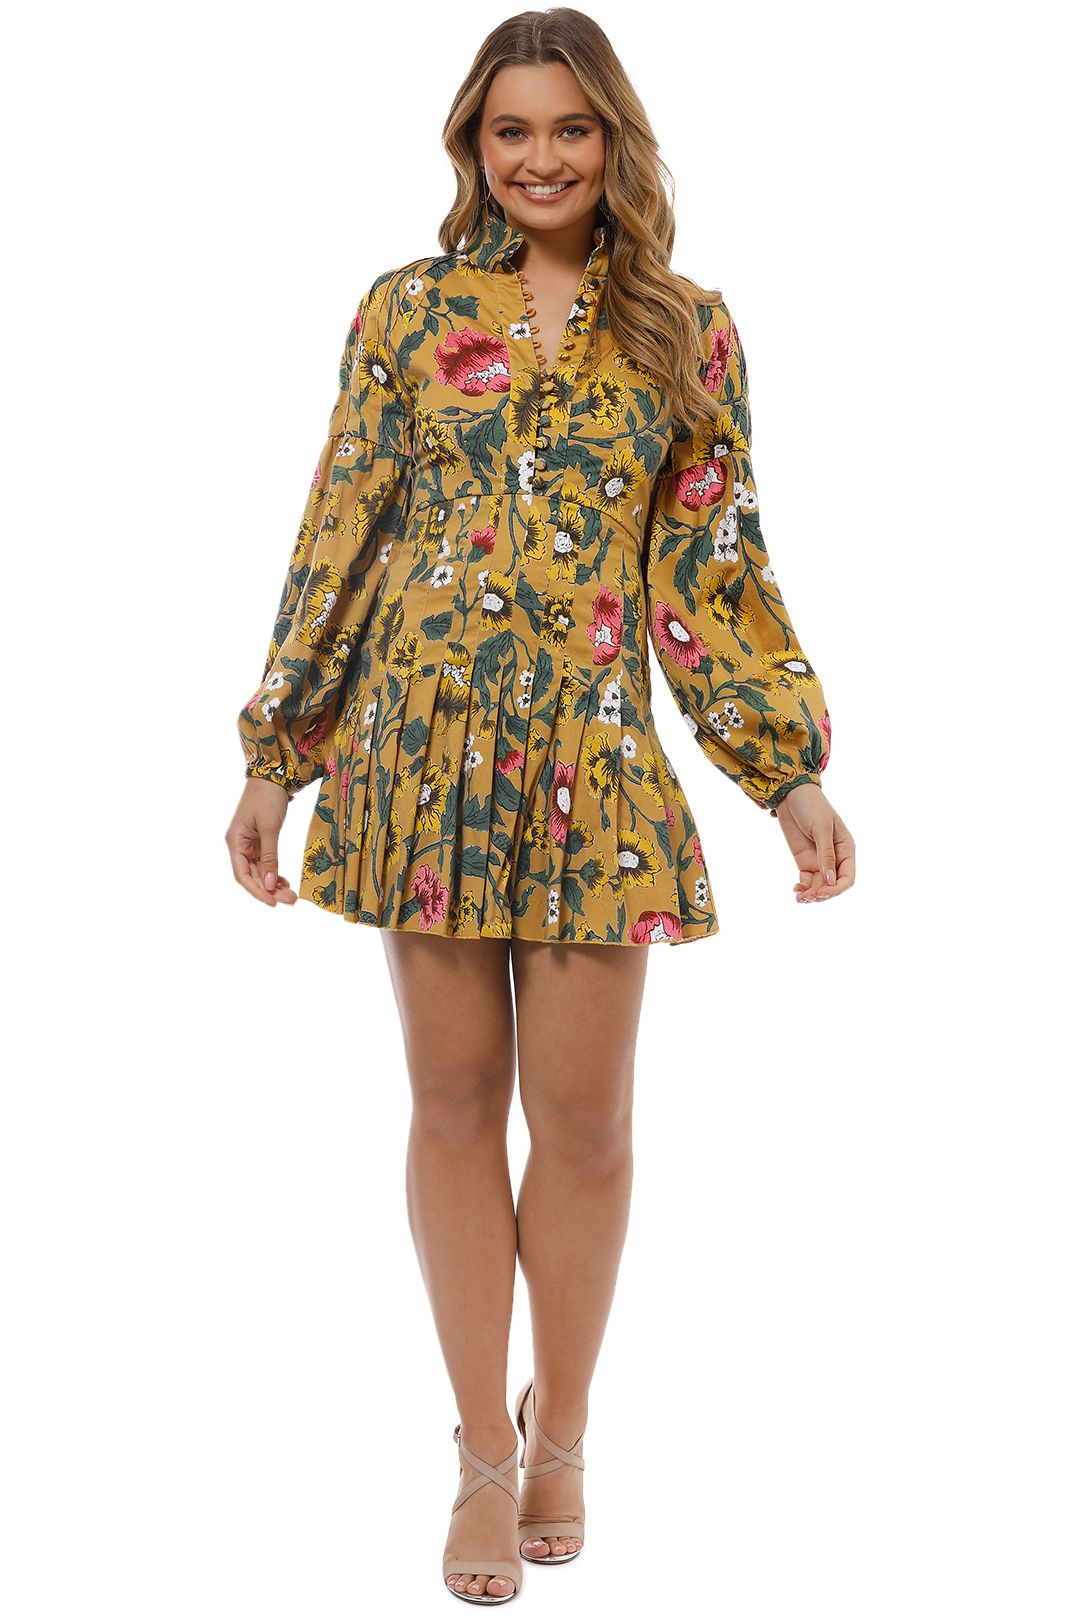 Cameo - Another Lover LS Dress - Front 